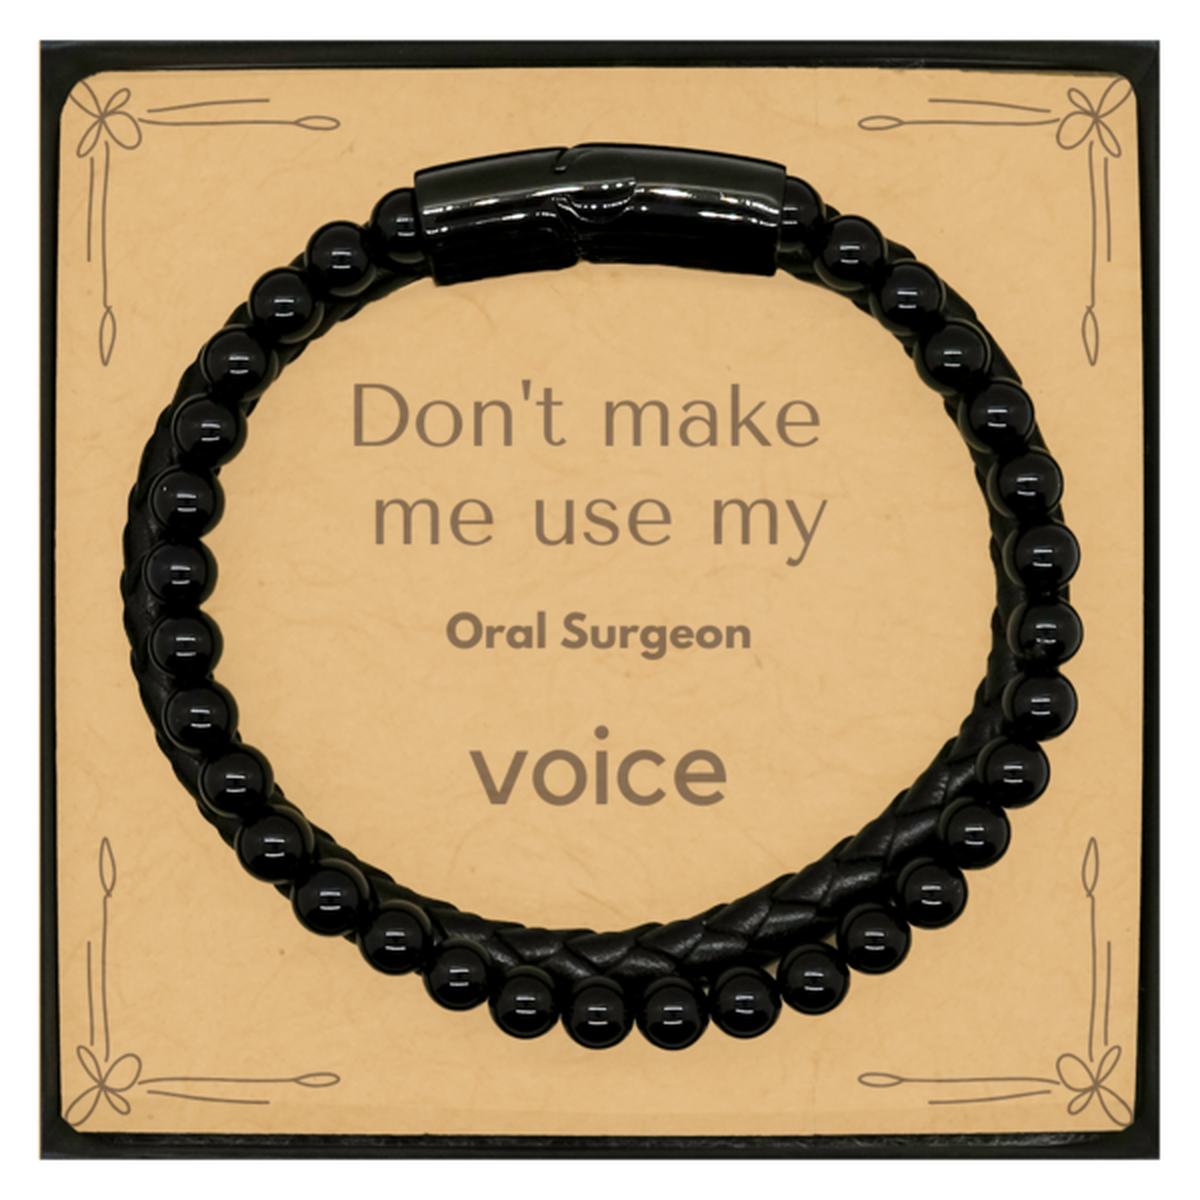 Don't make me use my Oral Surgeon voice, Sarcasm Oral Surgeon Card Gifts, Christmas Oral Surgeon Stone Leather Bracelets Birthday Unique Gifts For Oral Surgeon Coworkers, Men, Women, Colleague, Friends